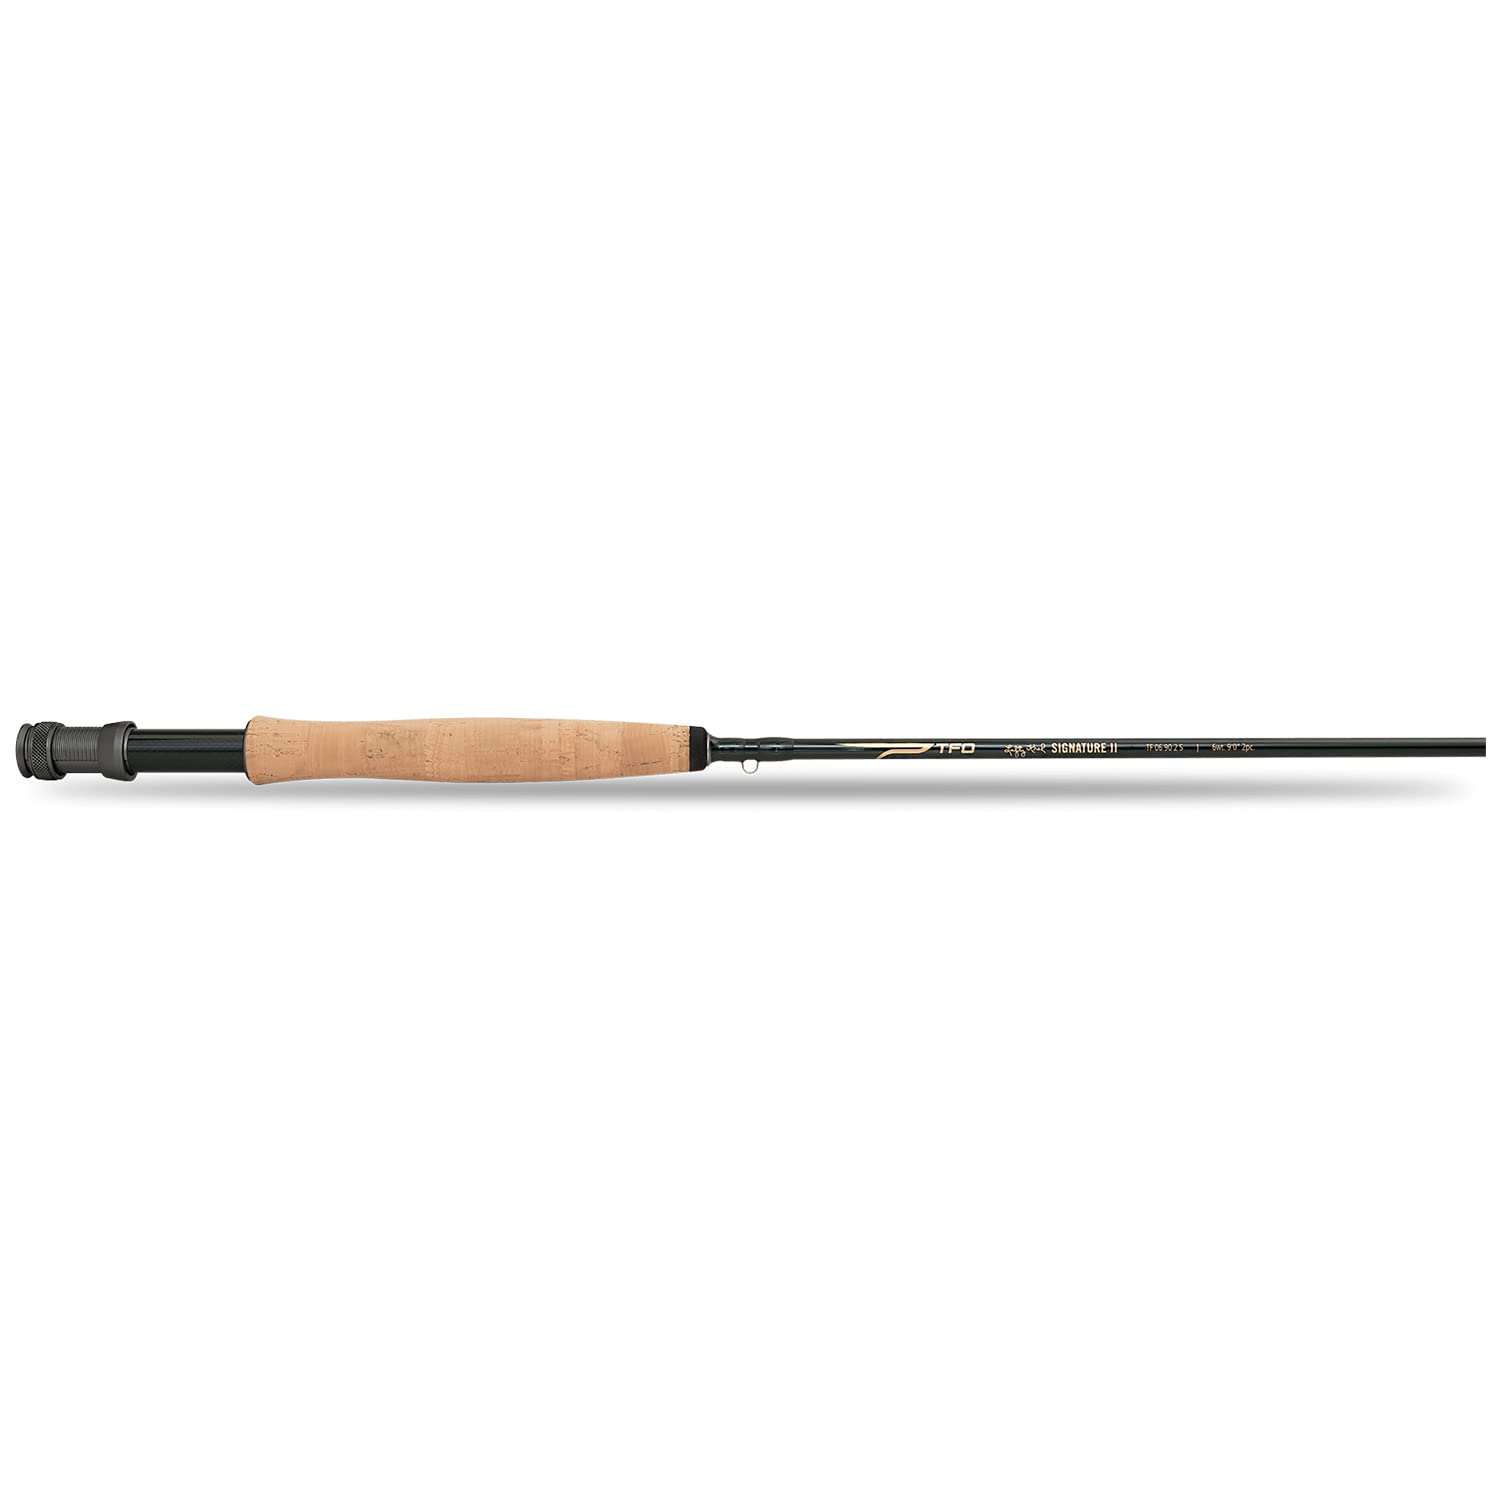 TEMPLE FORK OUTFITTERS Signature II Freshwater Saltwater Moderate